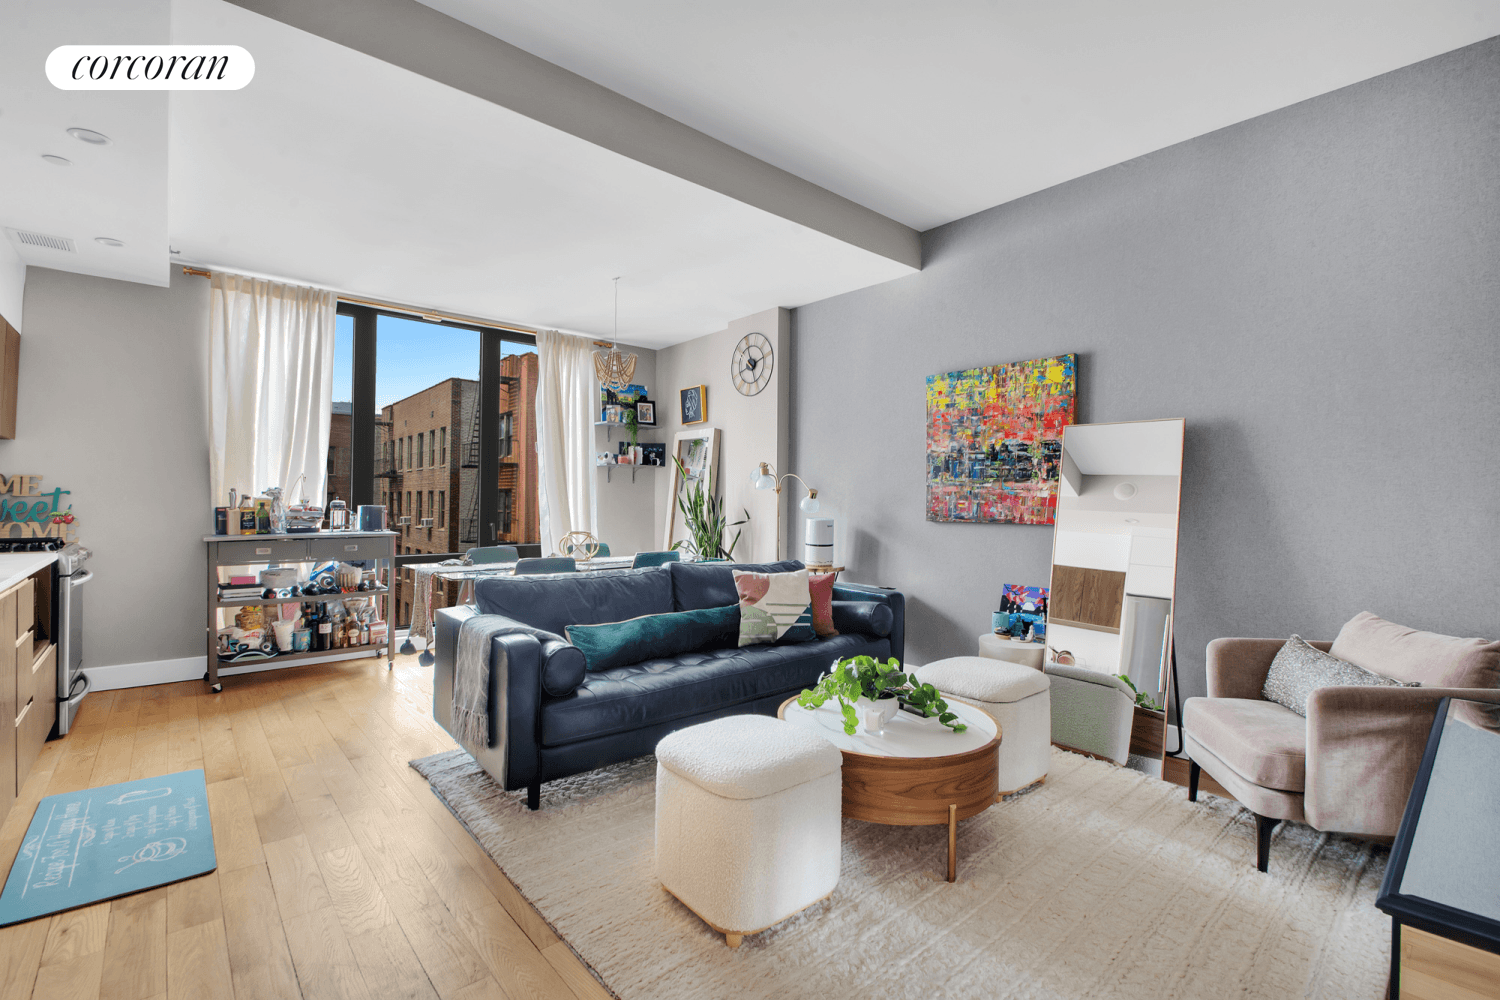 Welcome to Unit 6H at 2100 Bedford Avenue a radiant, urban sanctuary bathed in natural light, nestled in the dynamic heart of Brooklyn.